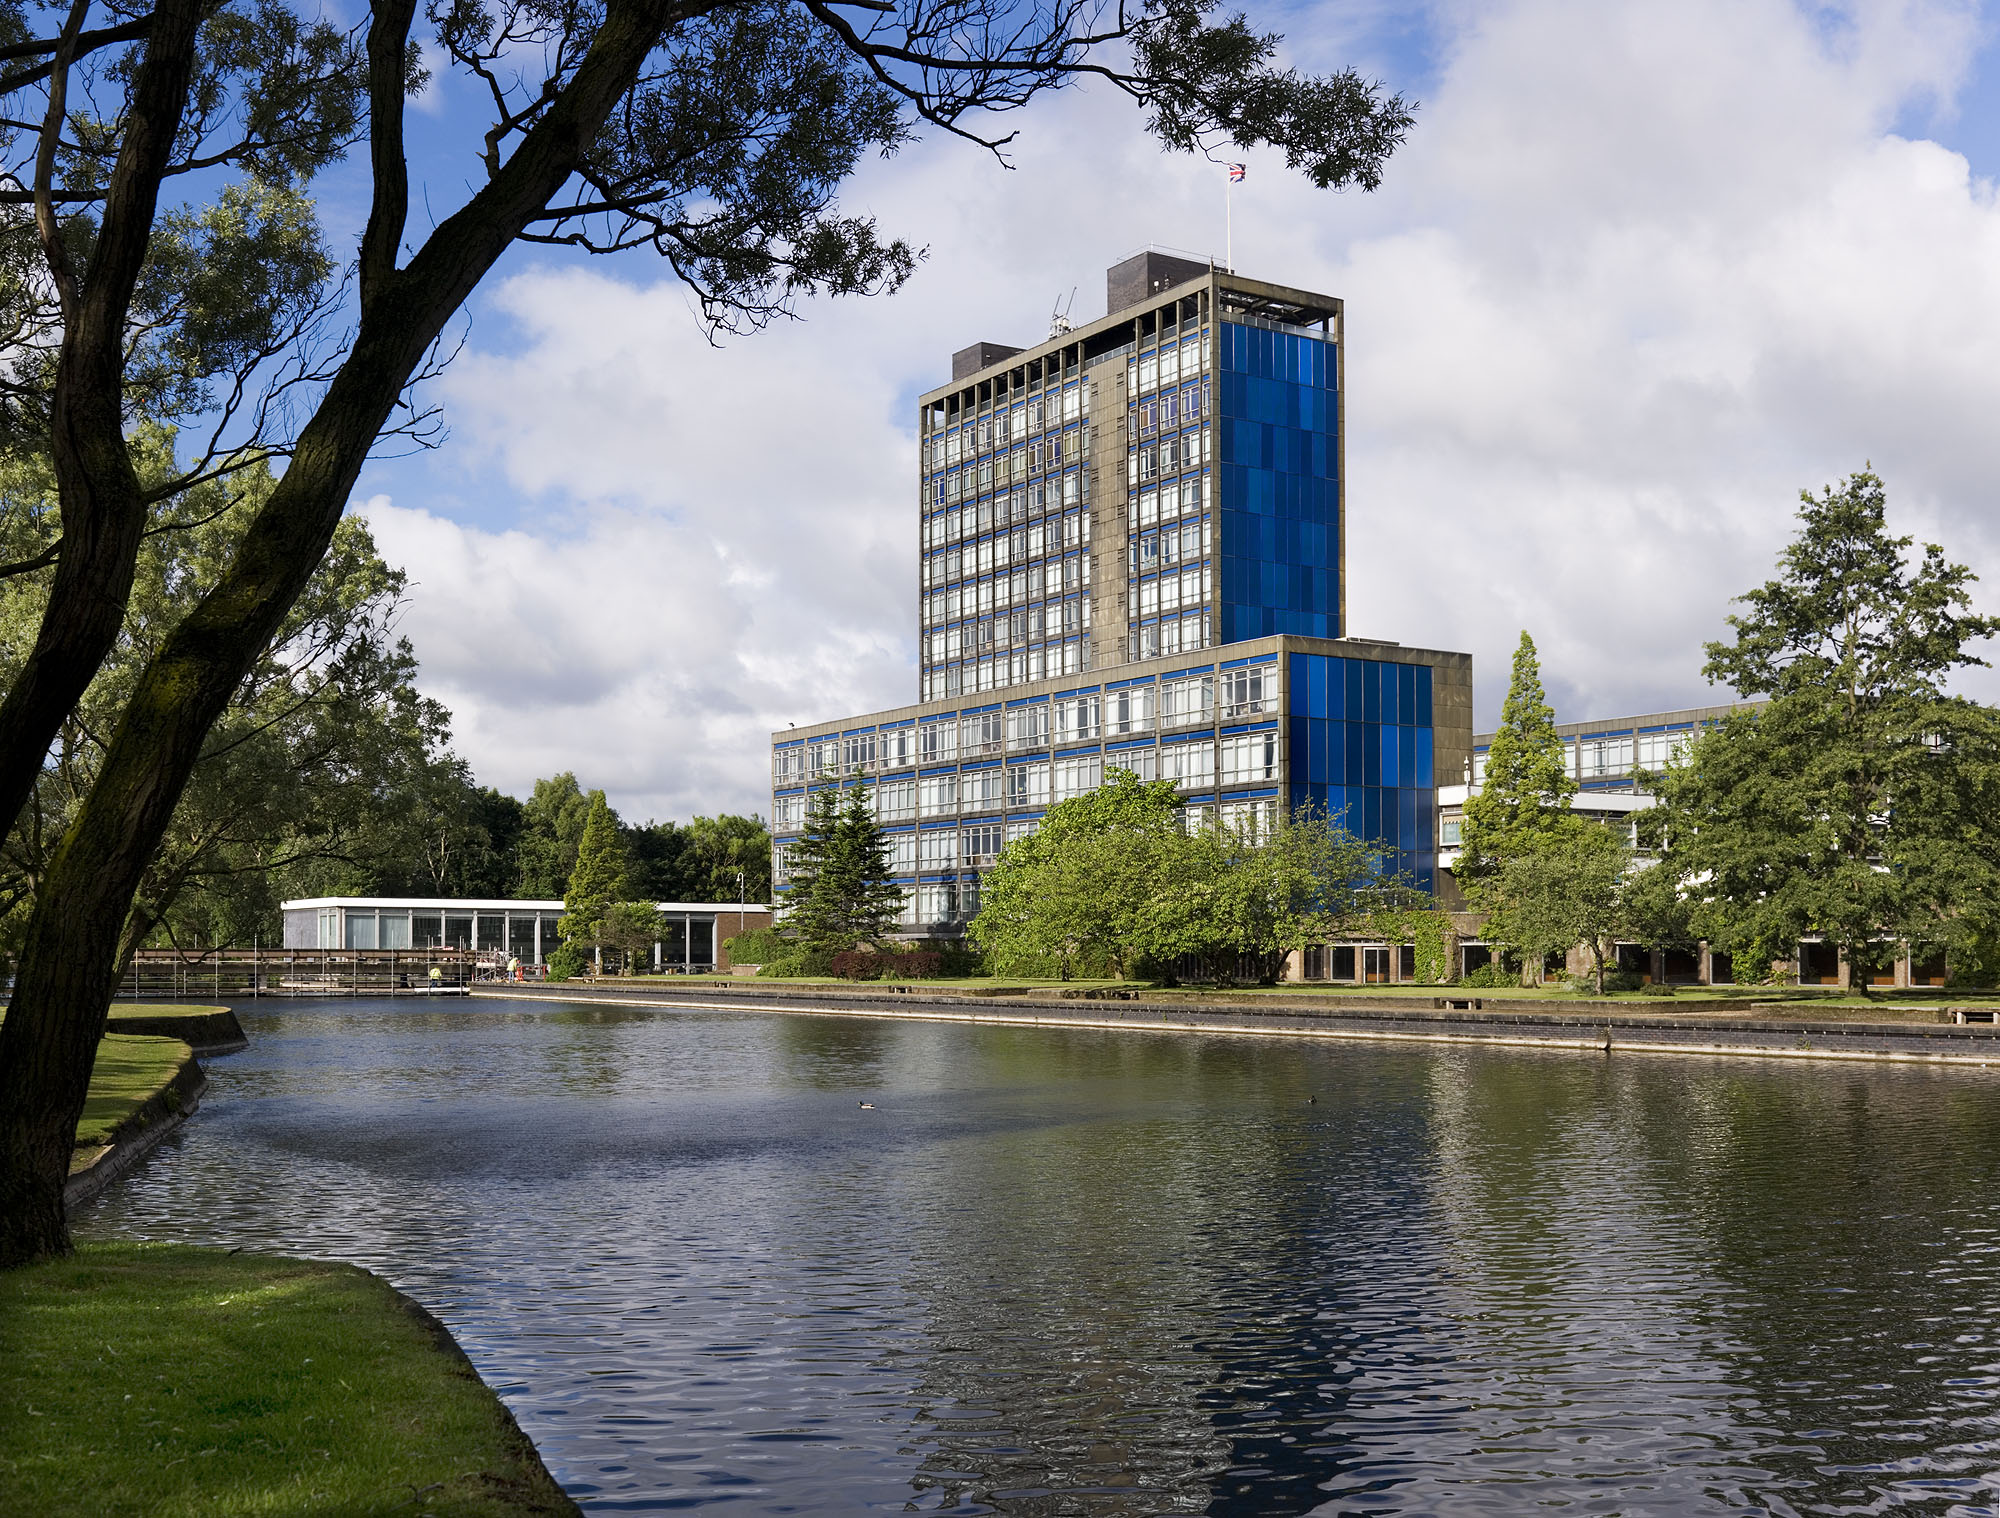 Pilkingtons Head Office building with lake in foreground, St Helen's.